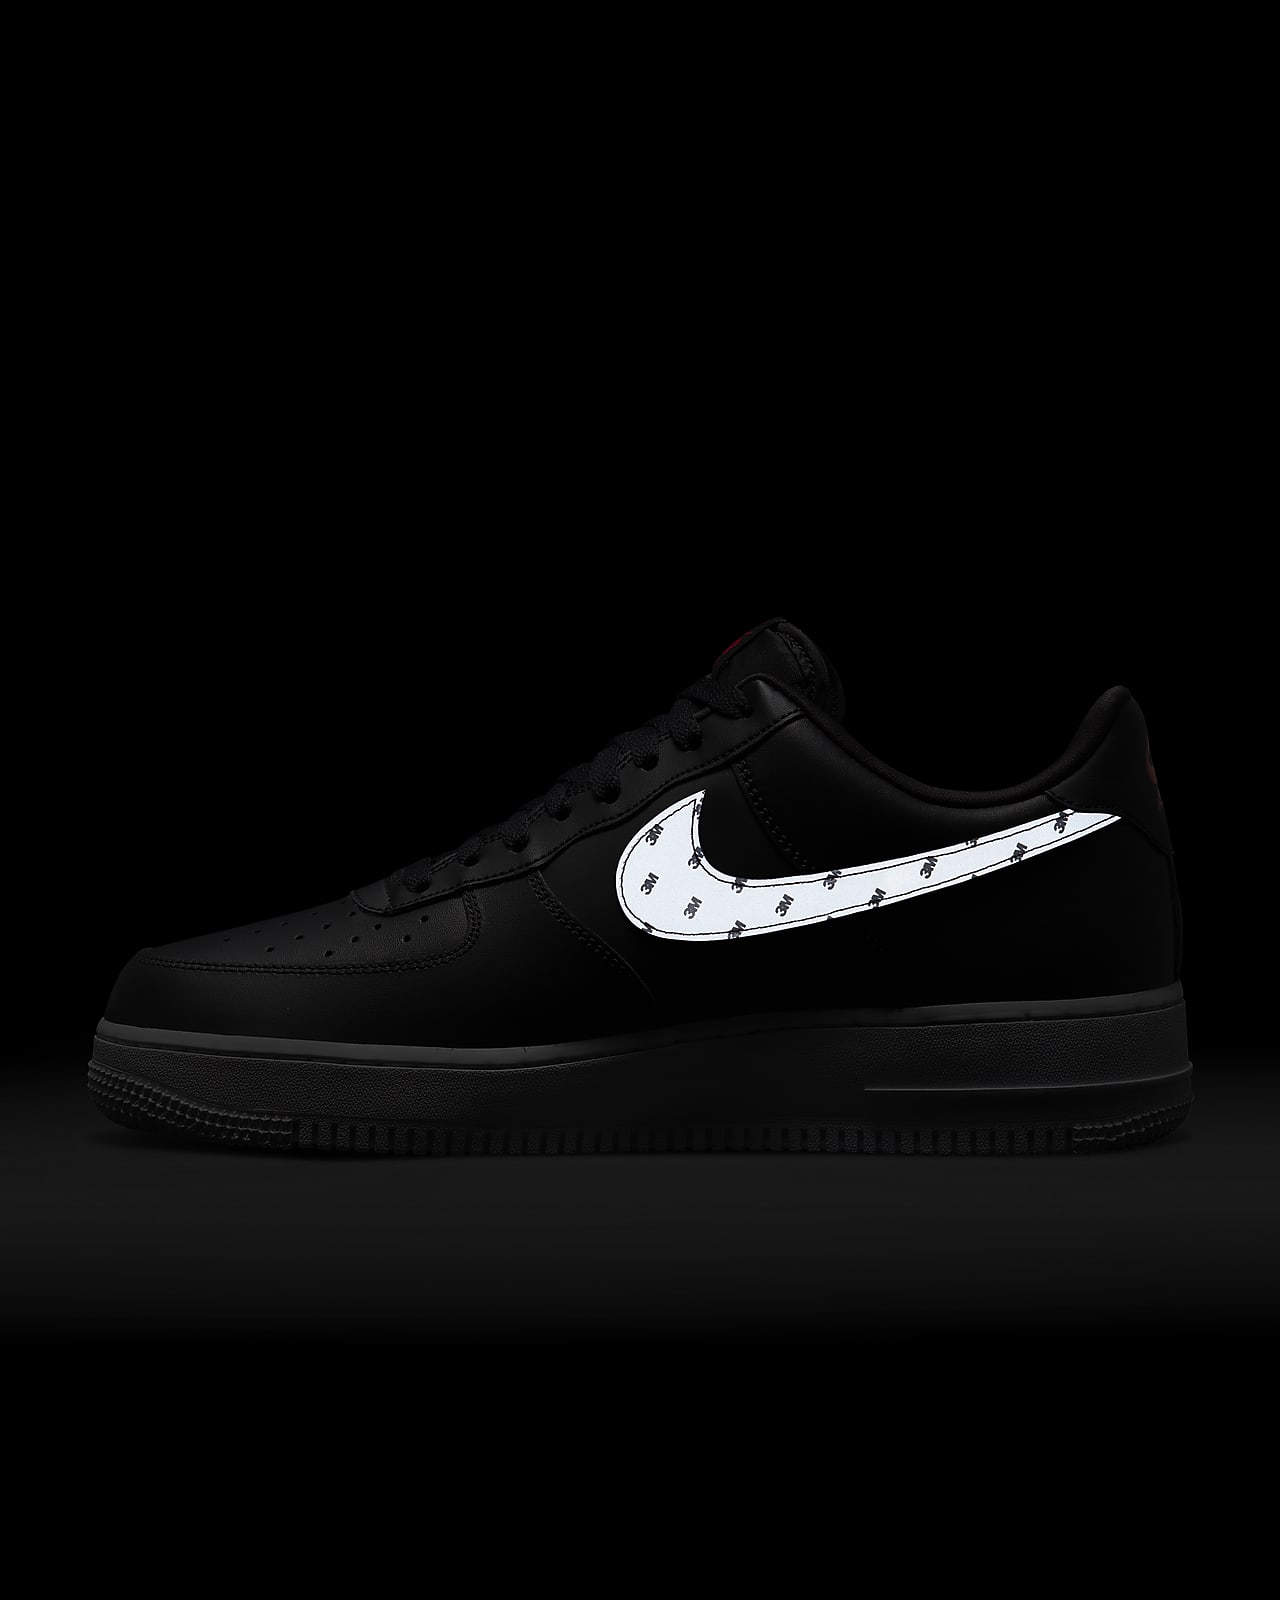 air force 1 black and silver